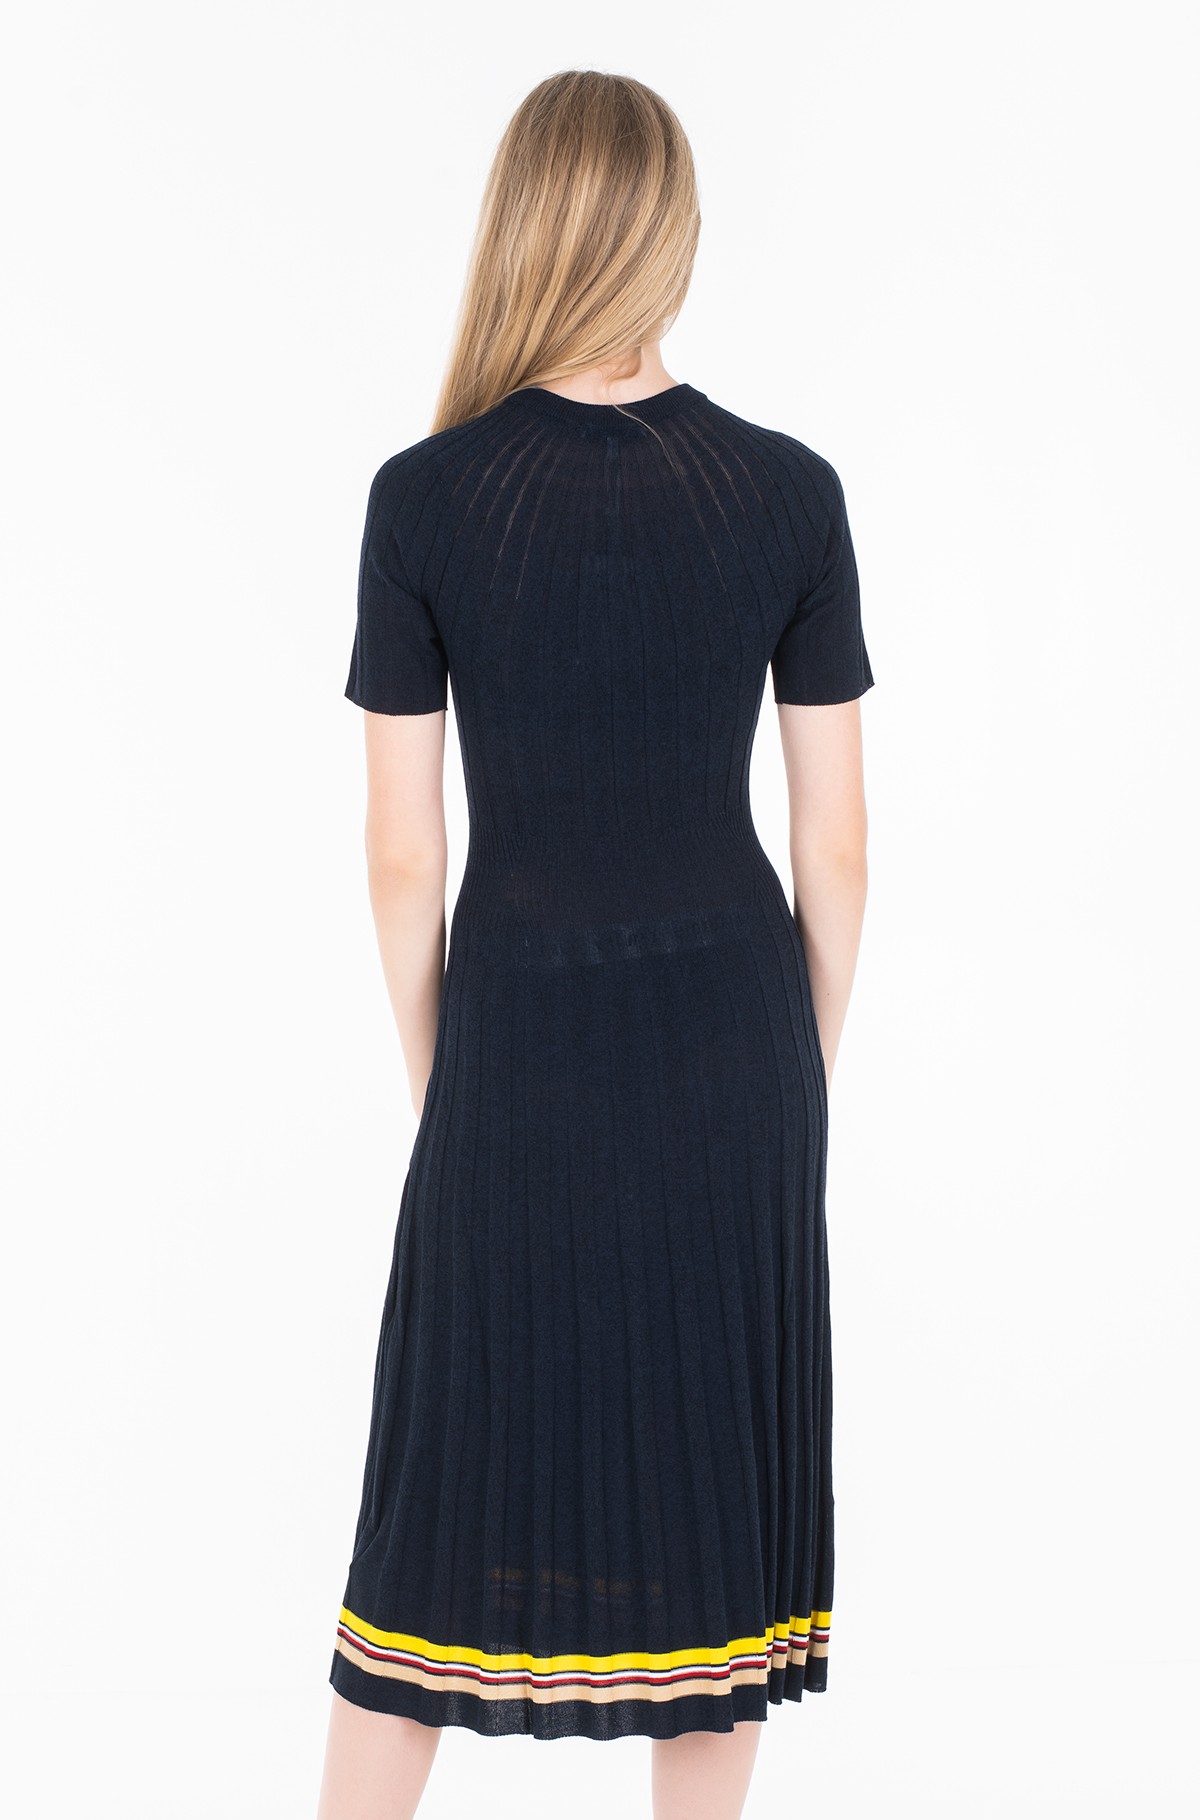 tommy hilfiger knitted dress